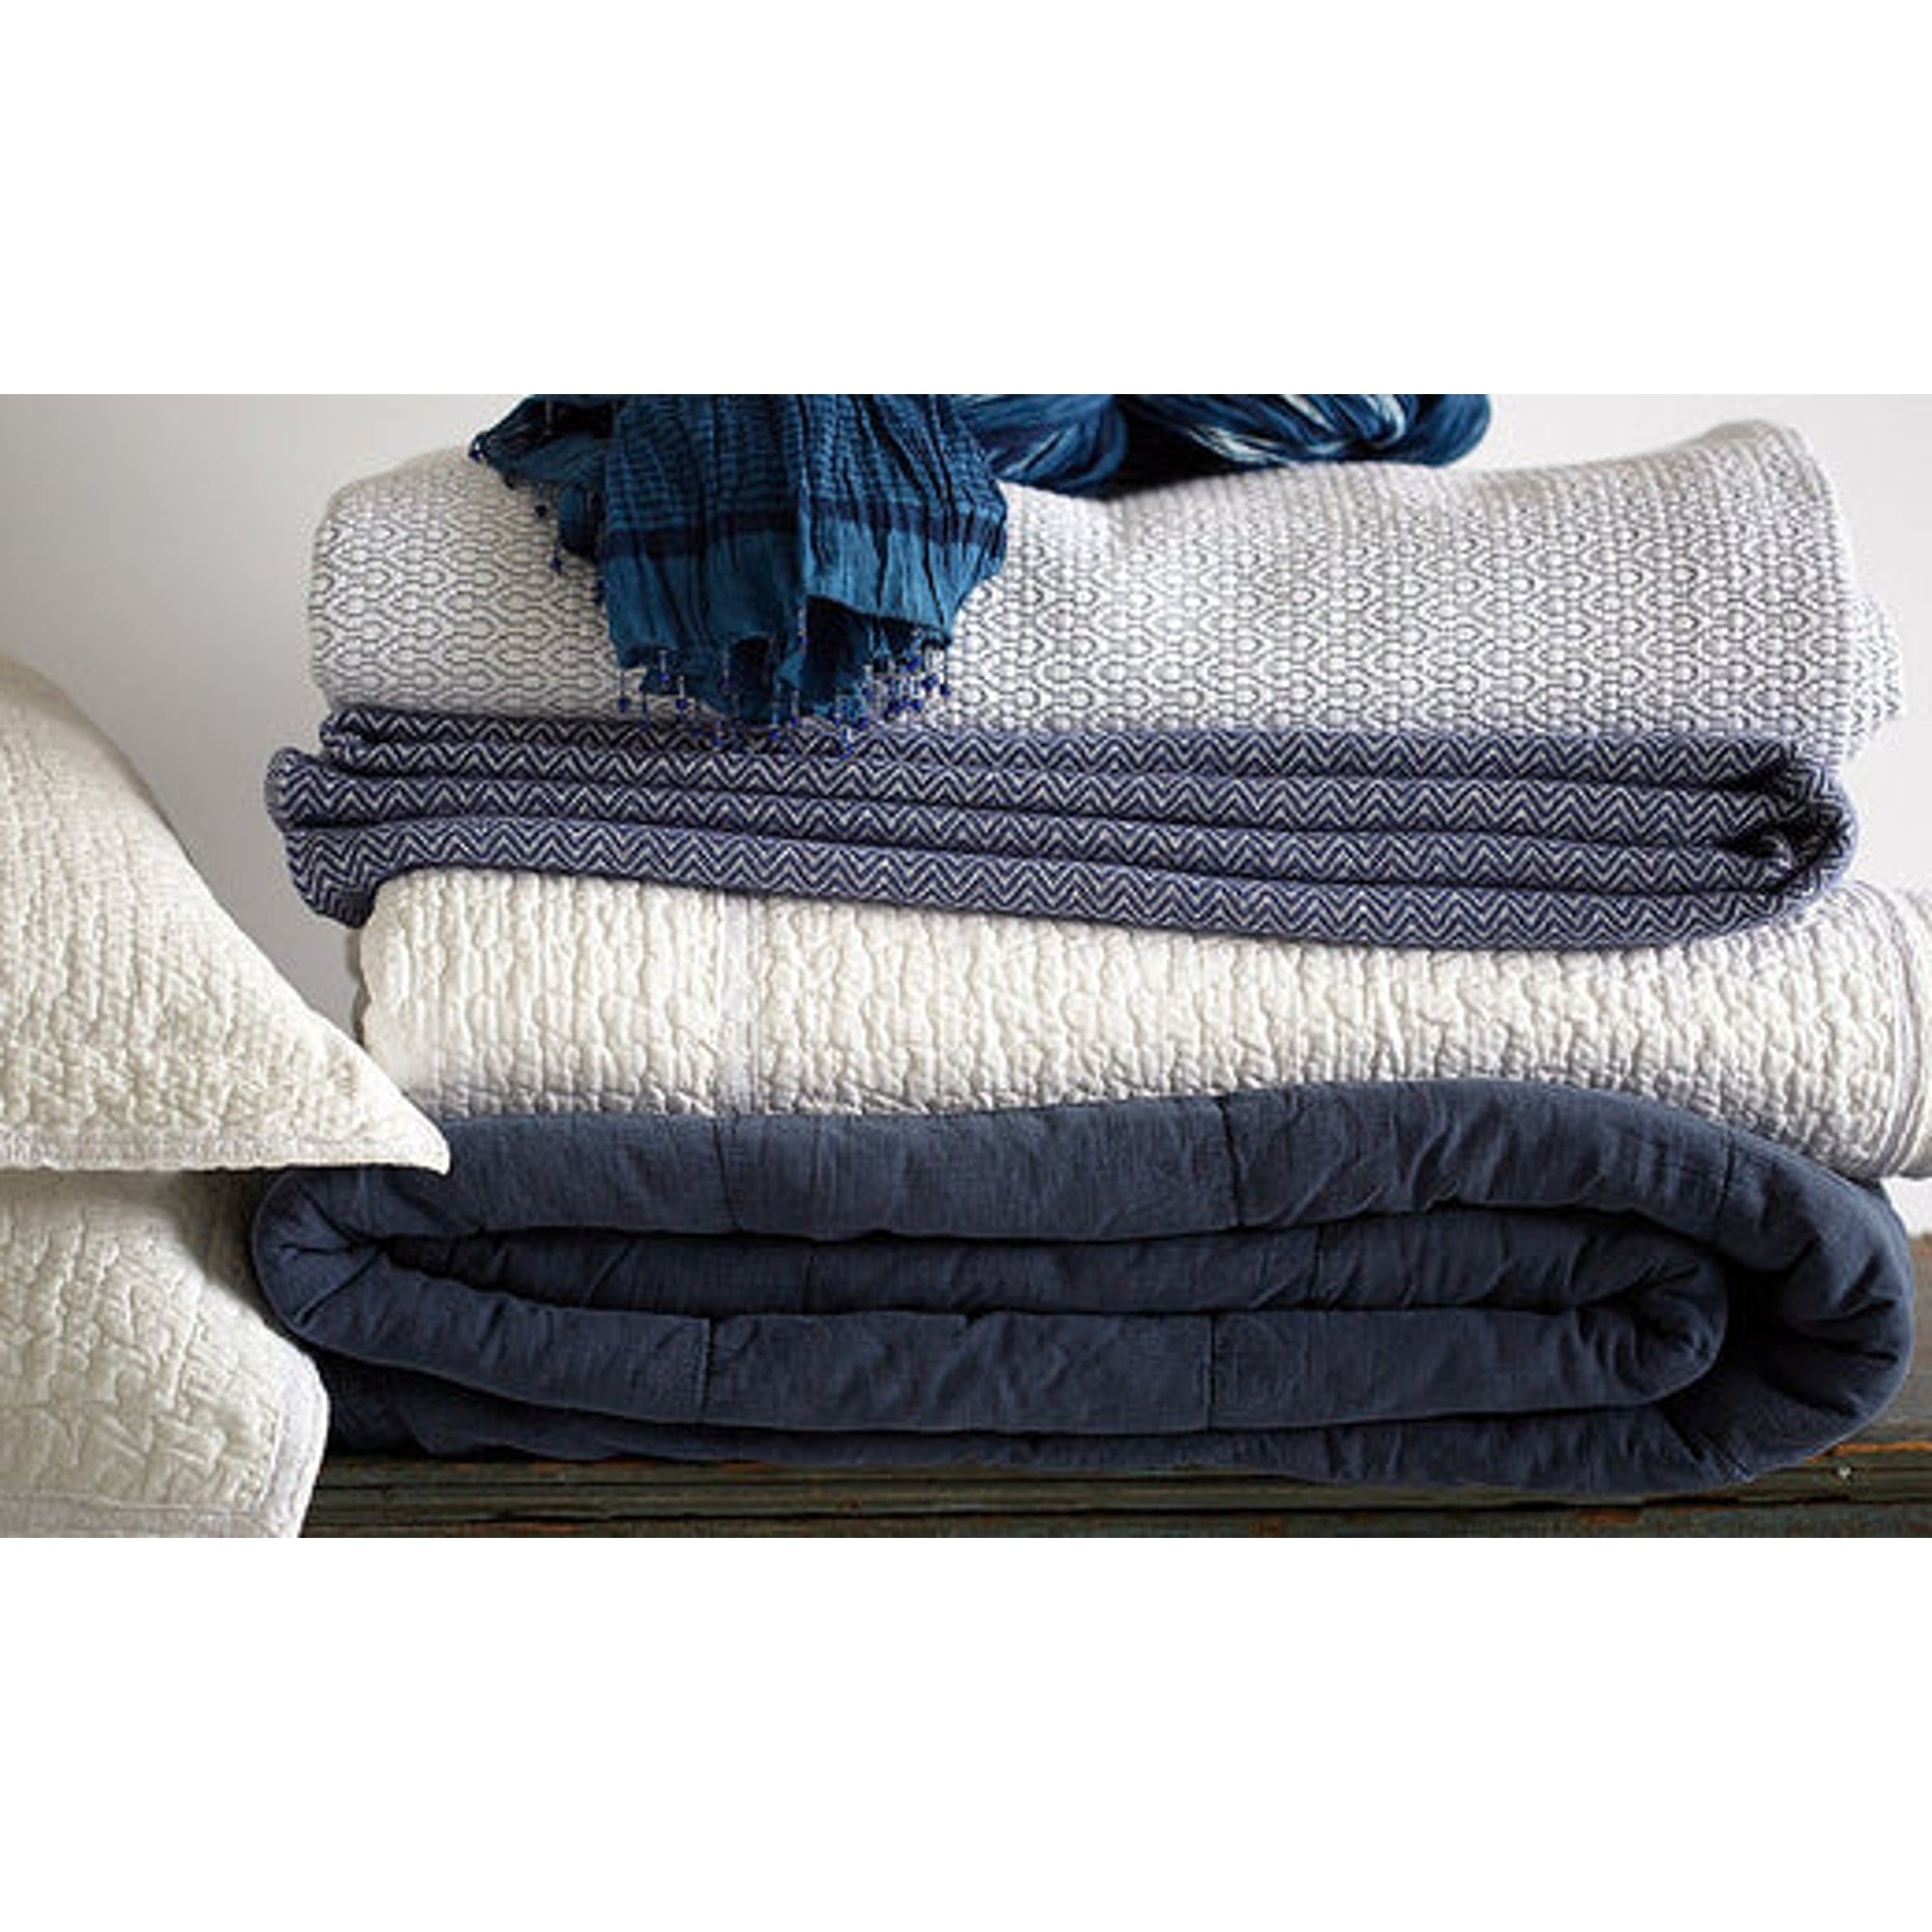 What is the Best Material for Blankets?